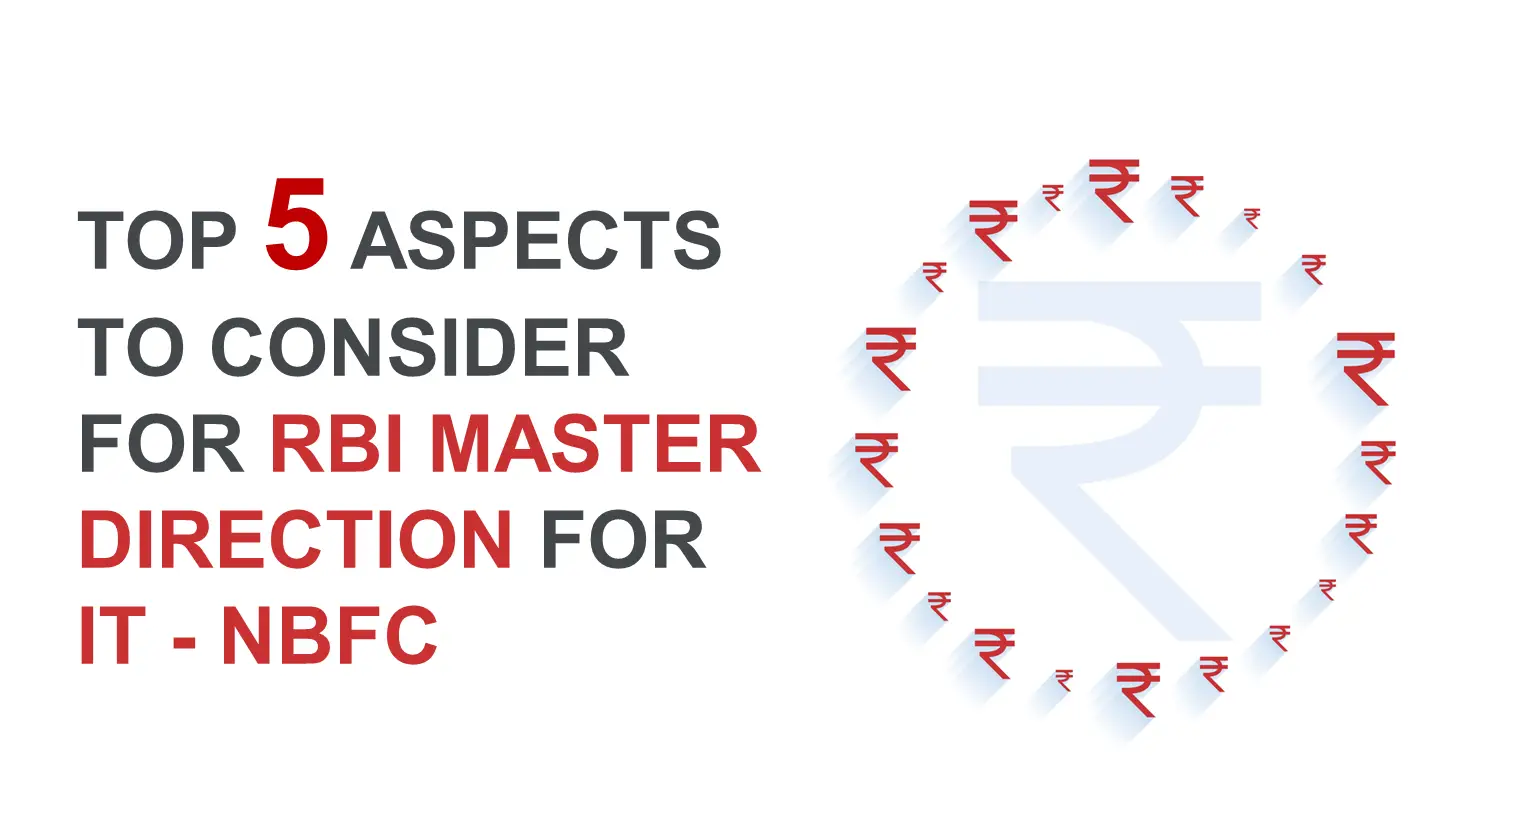 Top 5 Aspects to Consider for RBI Master Direction for IT - NBFC